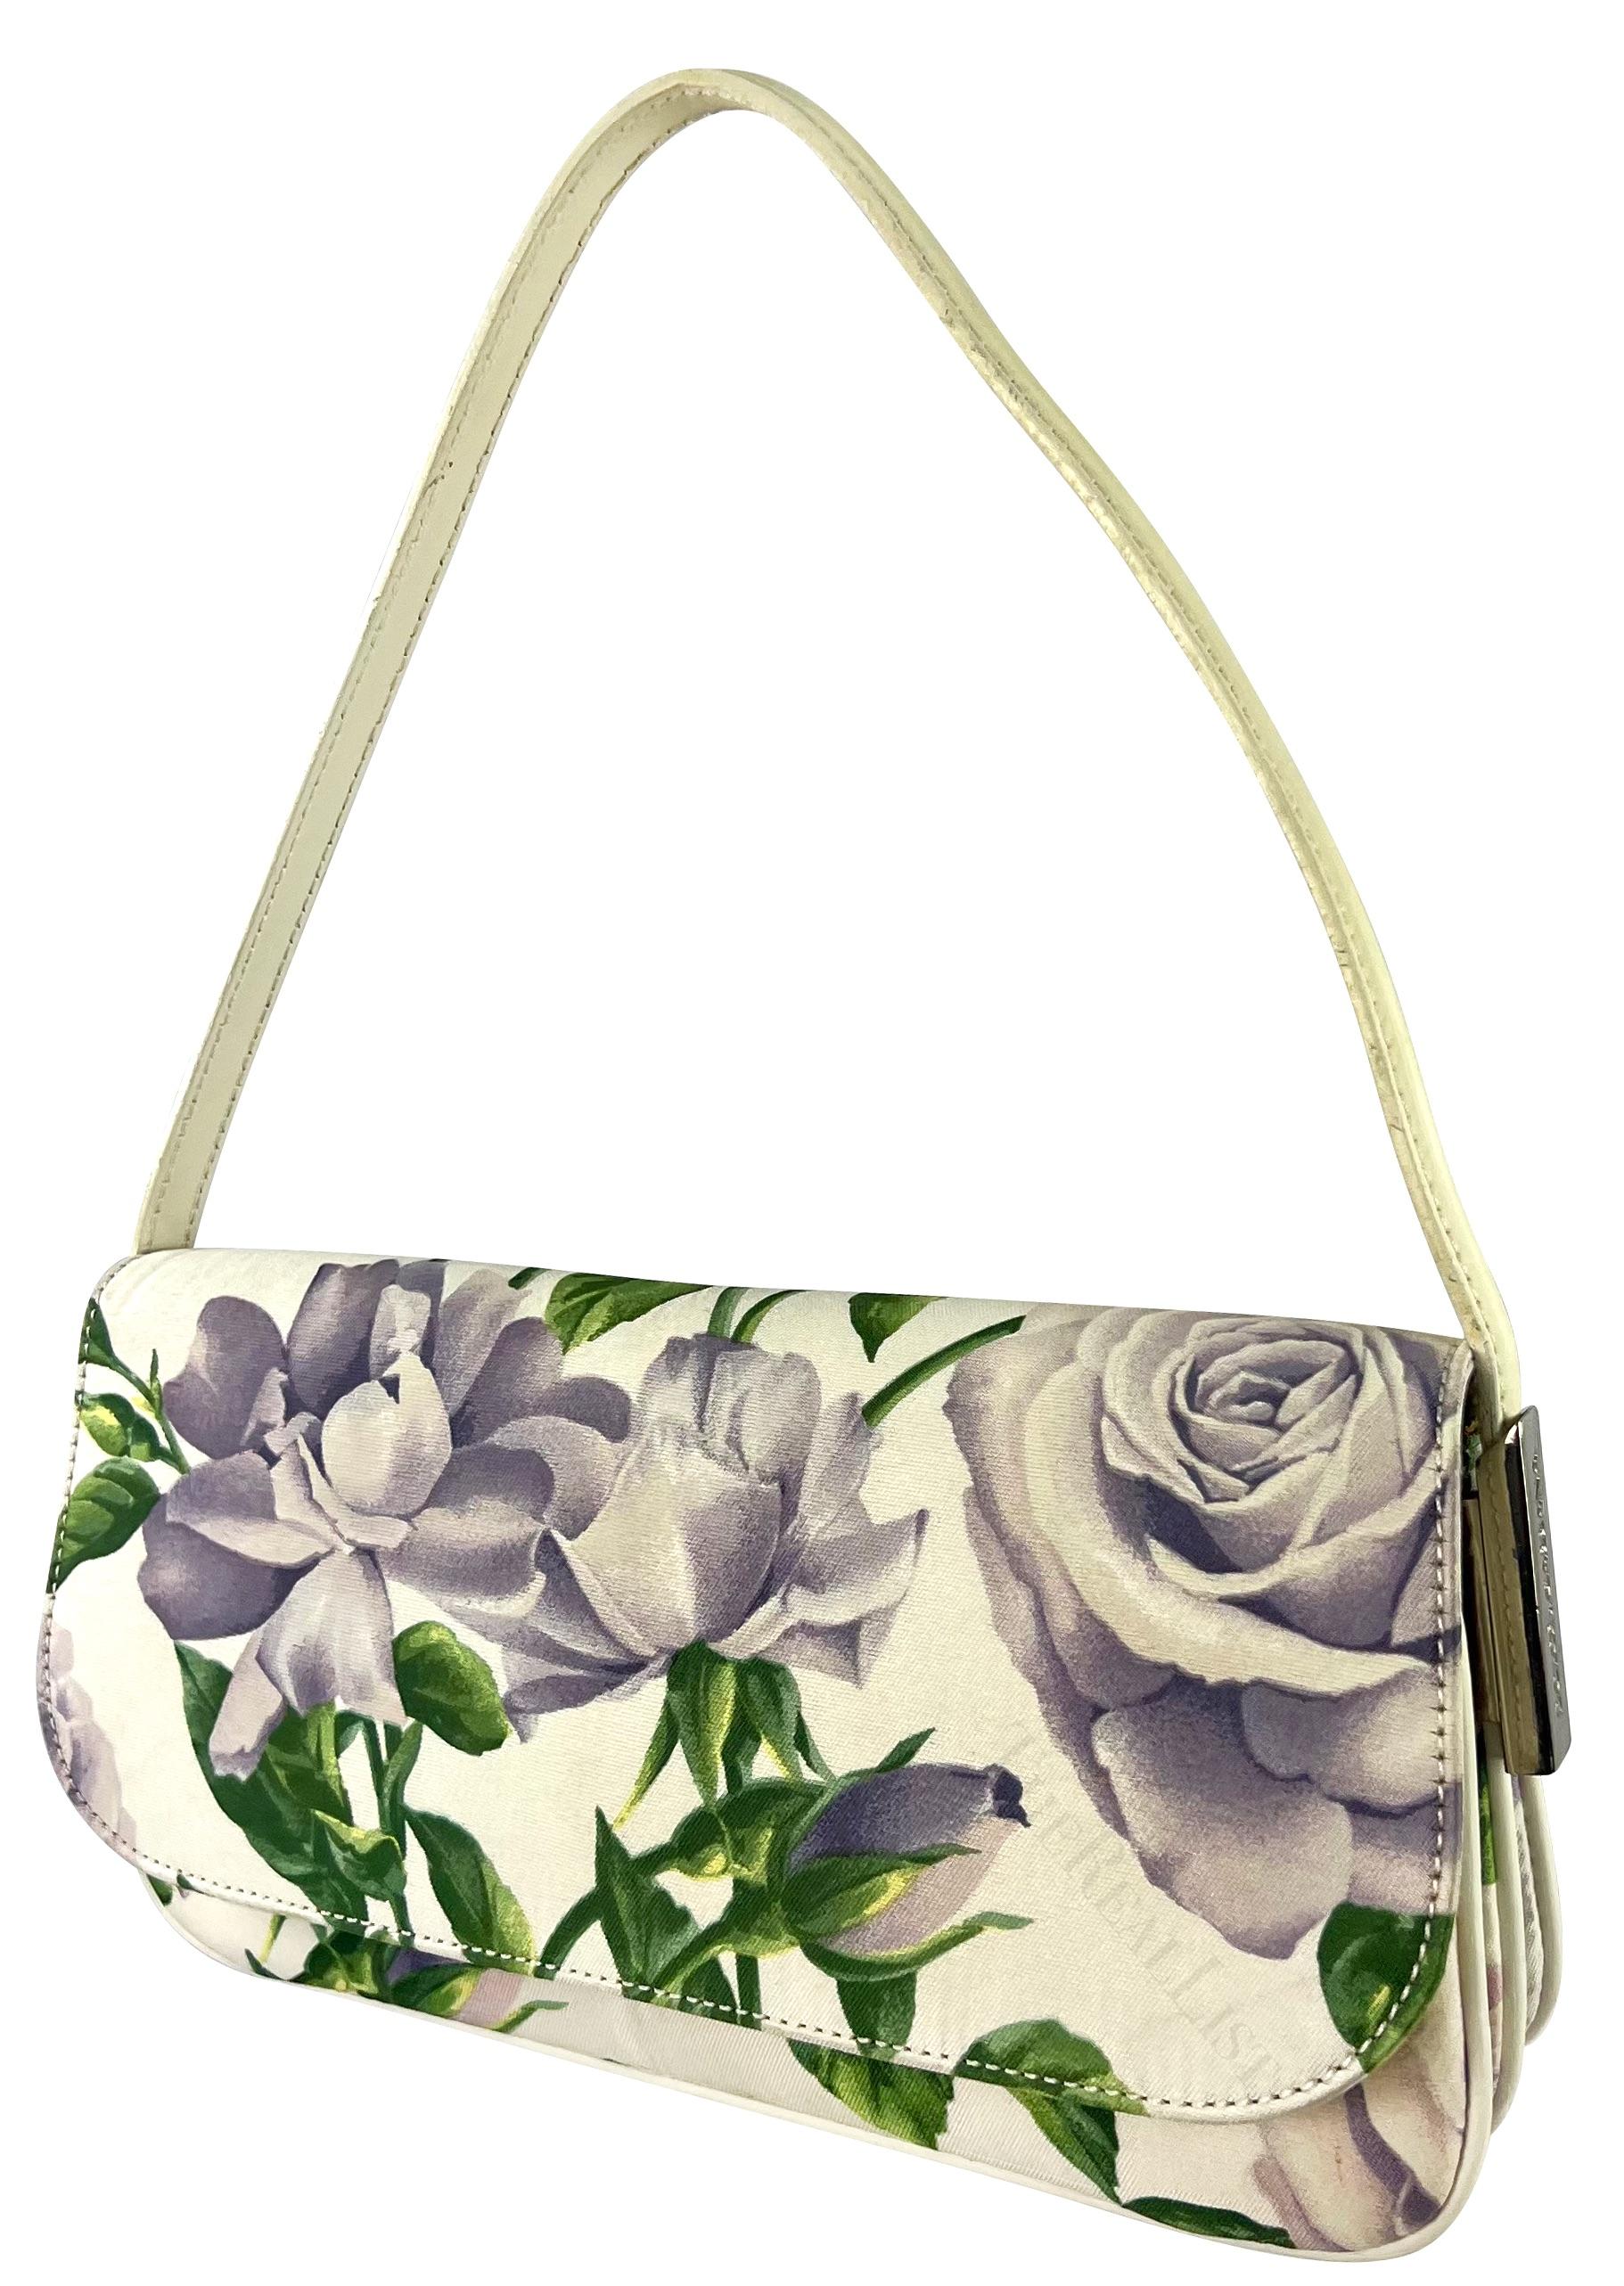 Presenting a fabulous purple rose floral Dolce & Gabbana flap shoulder bag. Elevate your style with this exquisite blue floral Dolce & Gabbana flap shoulder bag, a fashion-forward piece from the late 1990s / early 2000s. Effortlessly embodying